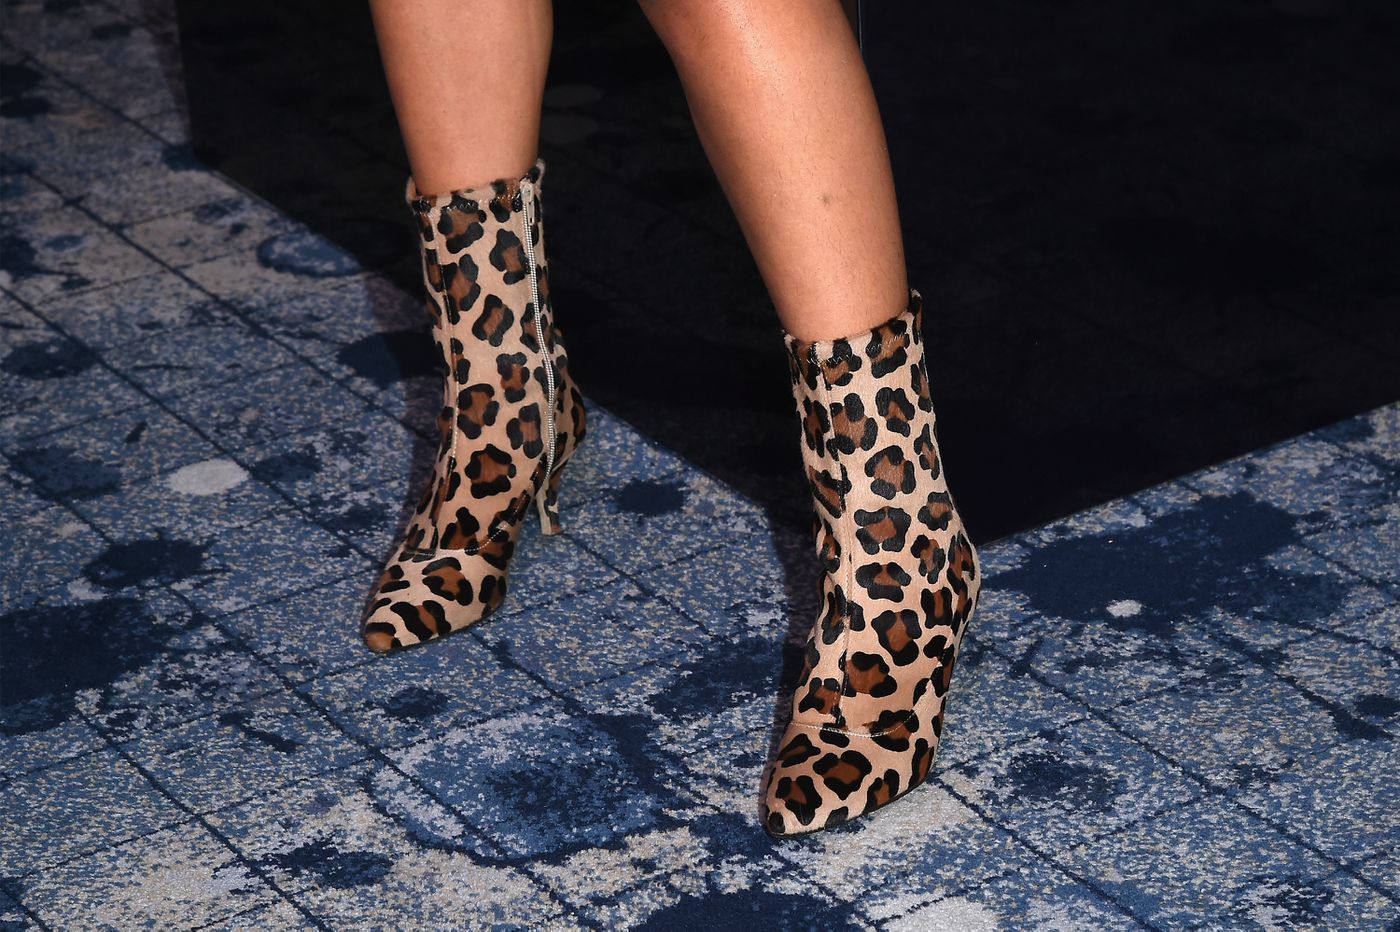 The Trashy, Expensive, Contradictory Reputation of Leopard Print - Racked